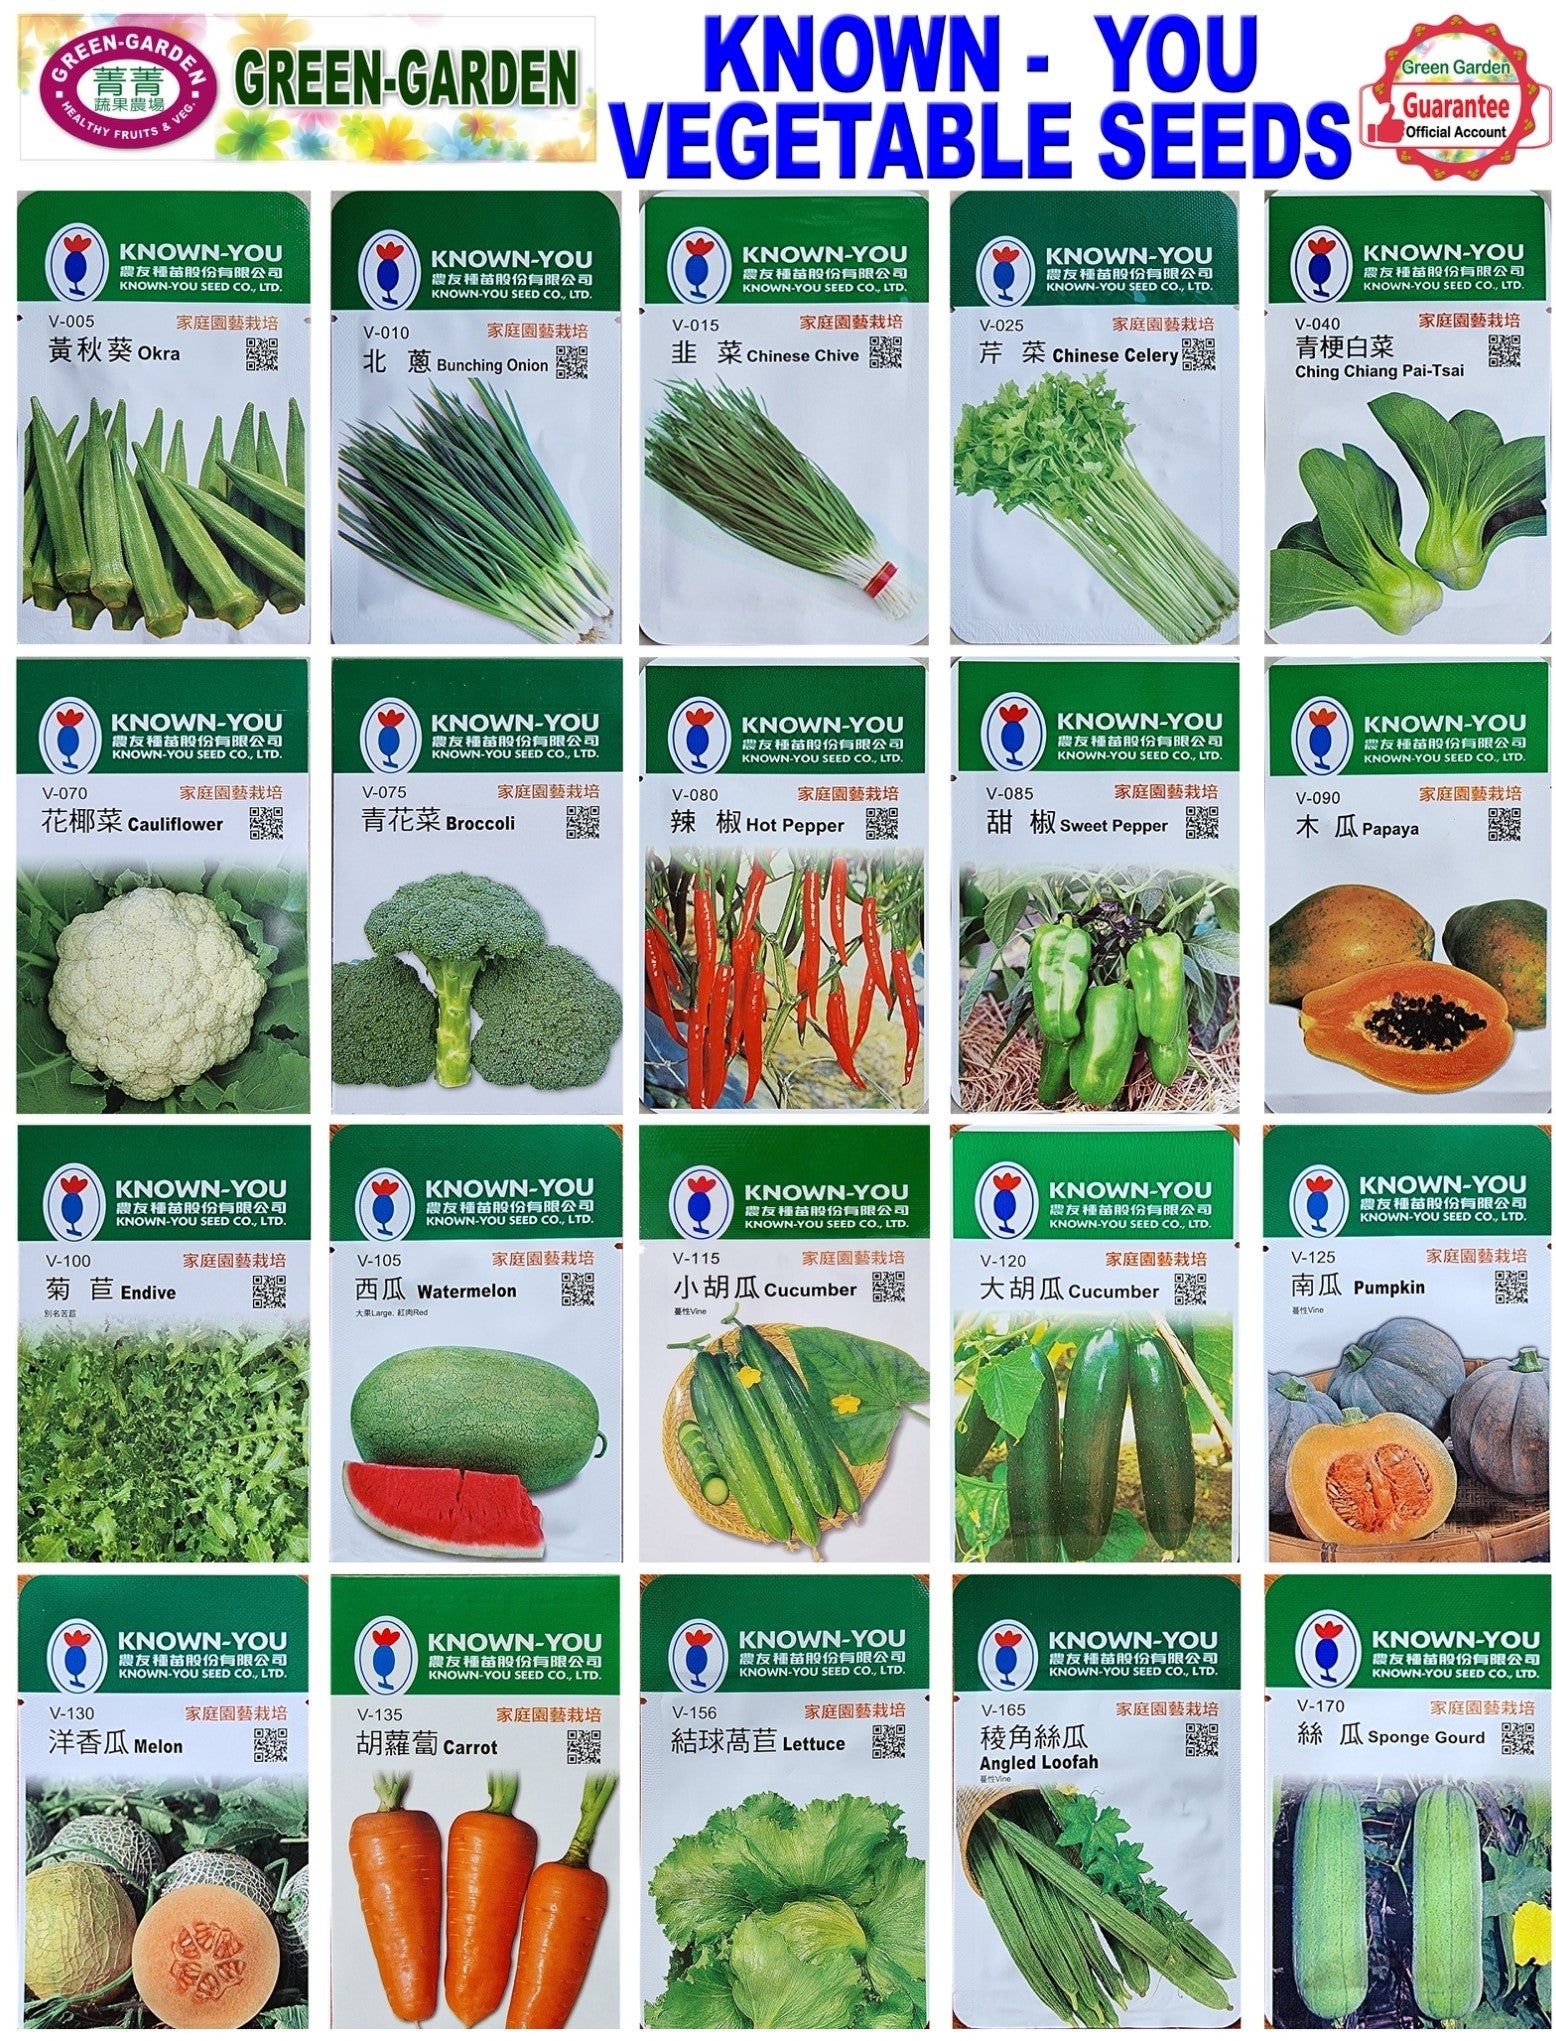 Known You Vegetable Seeds (V-150 Water Convolvus)